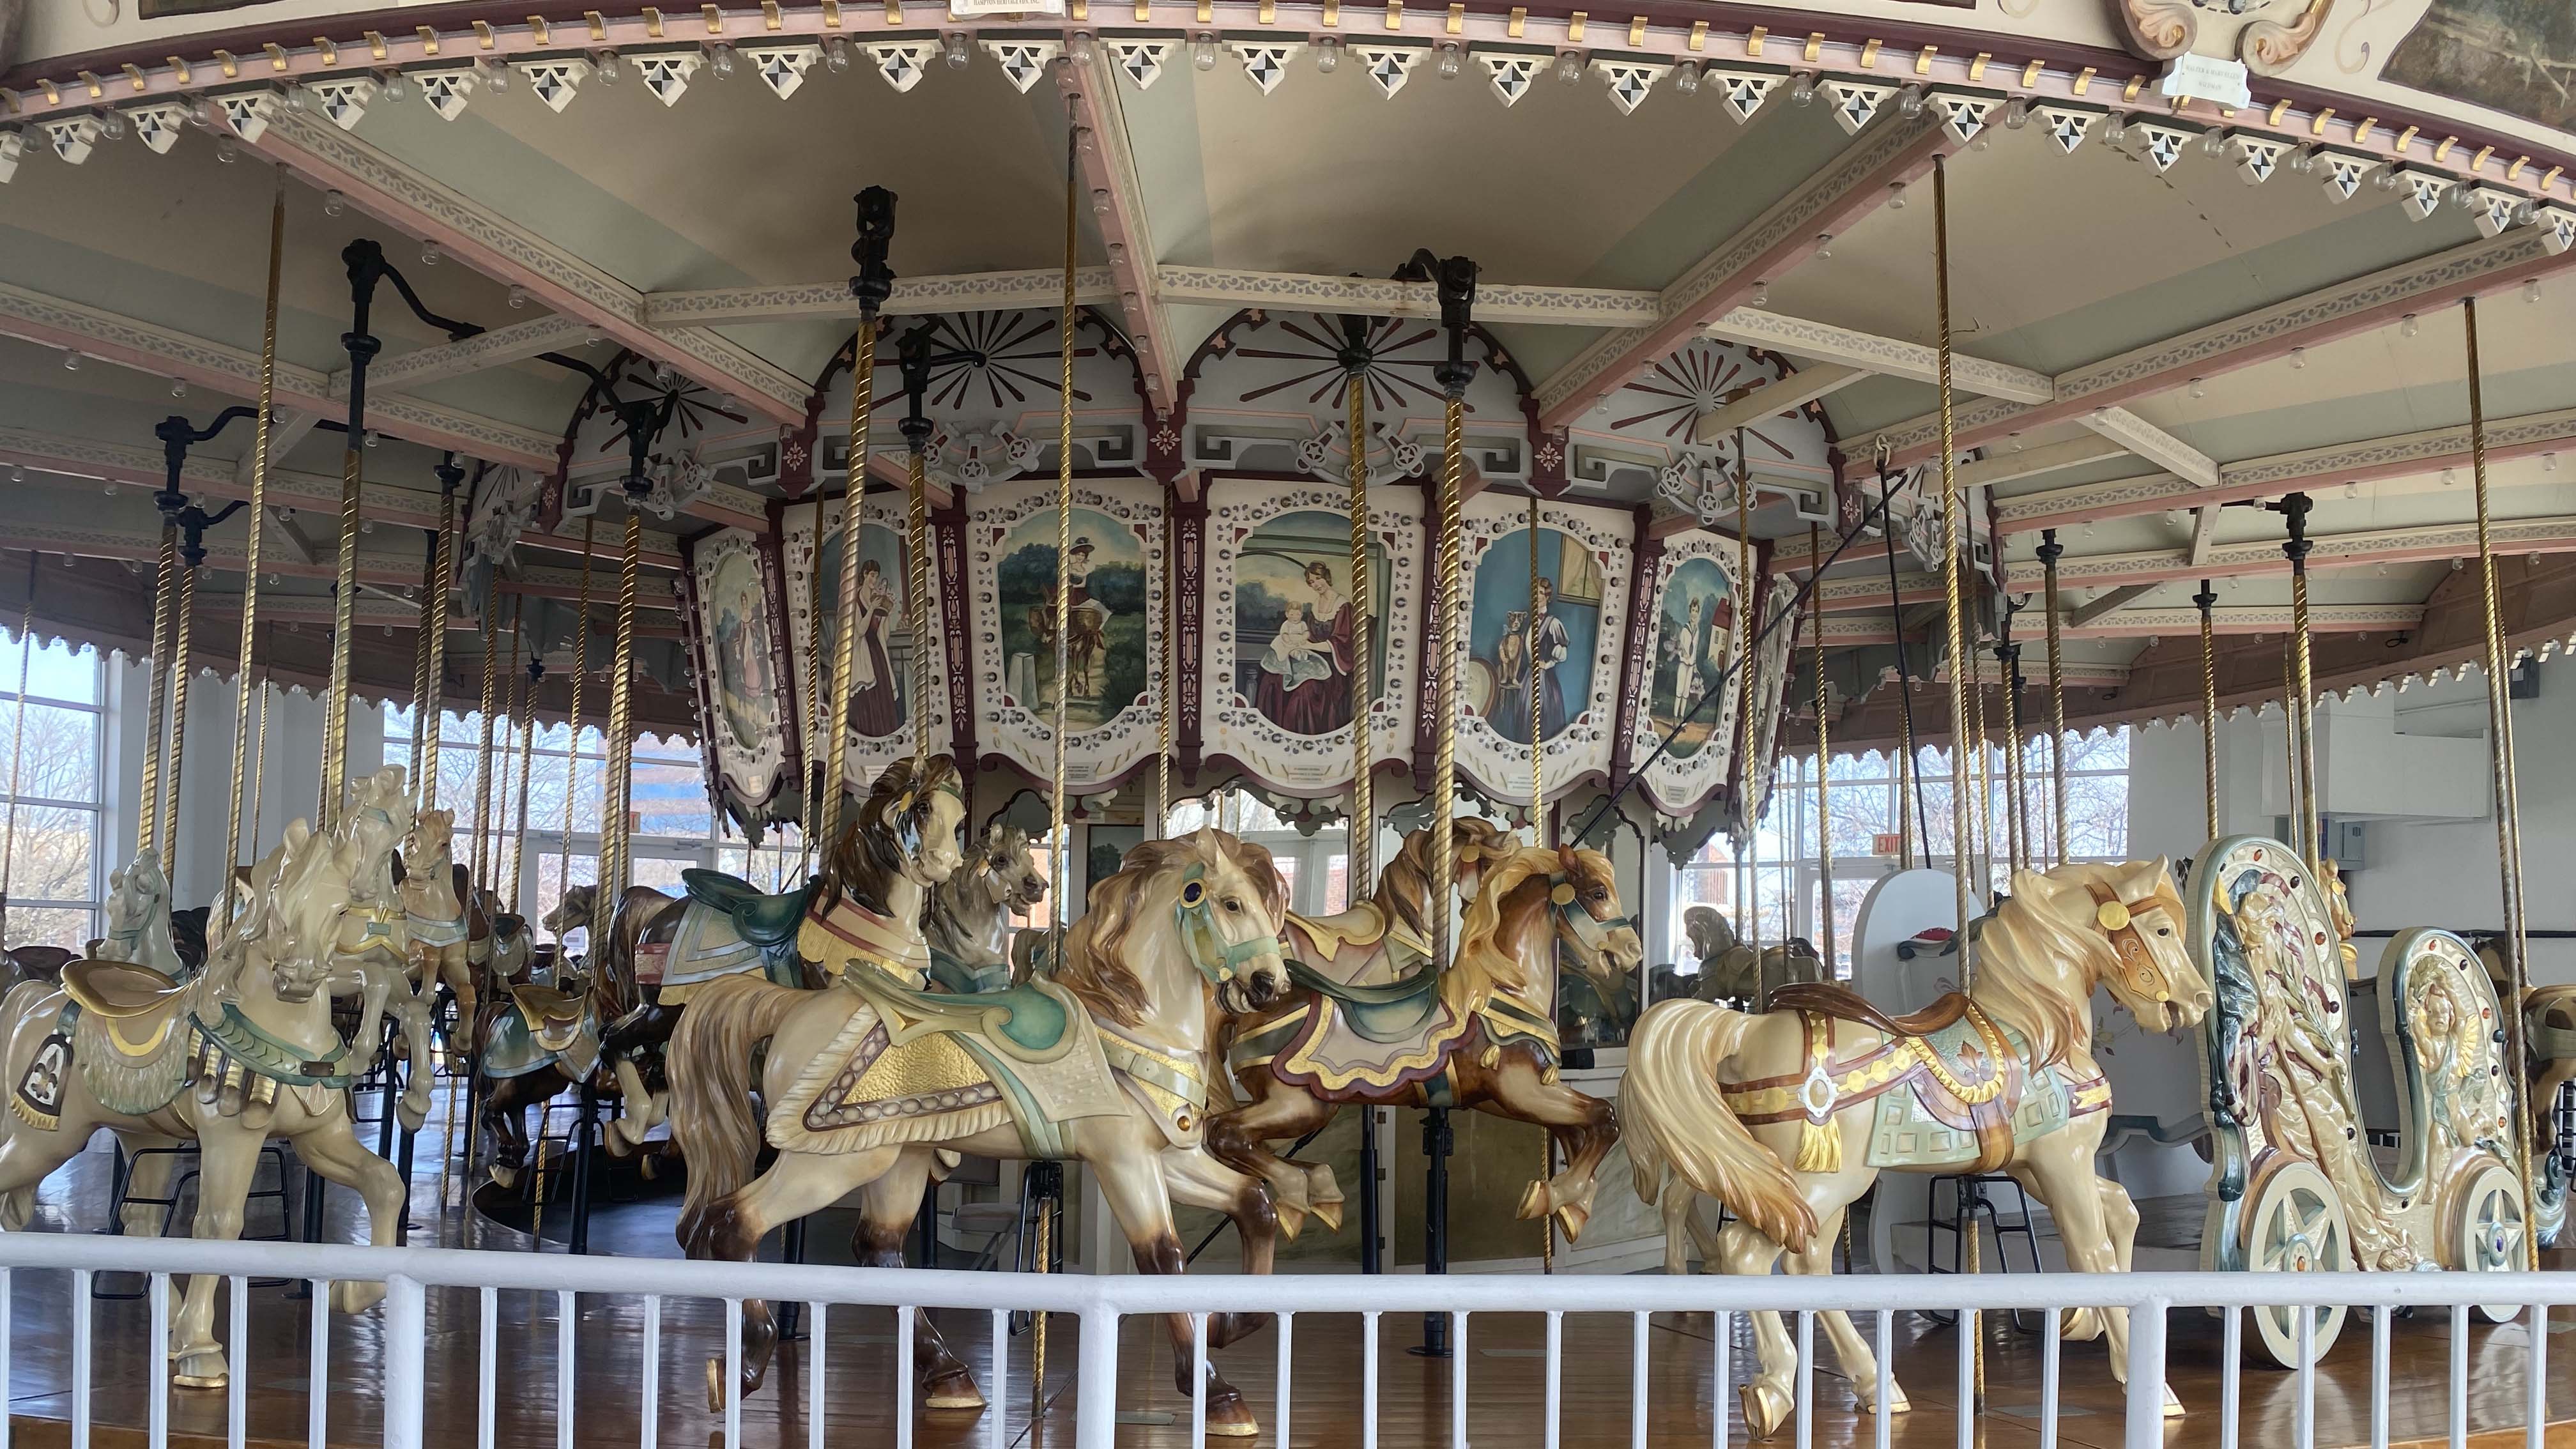 The historic Hampton carousel in downtown, which has been closed since last summer. (Image: Katherine Hafner)